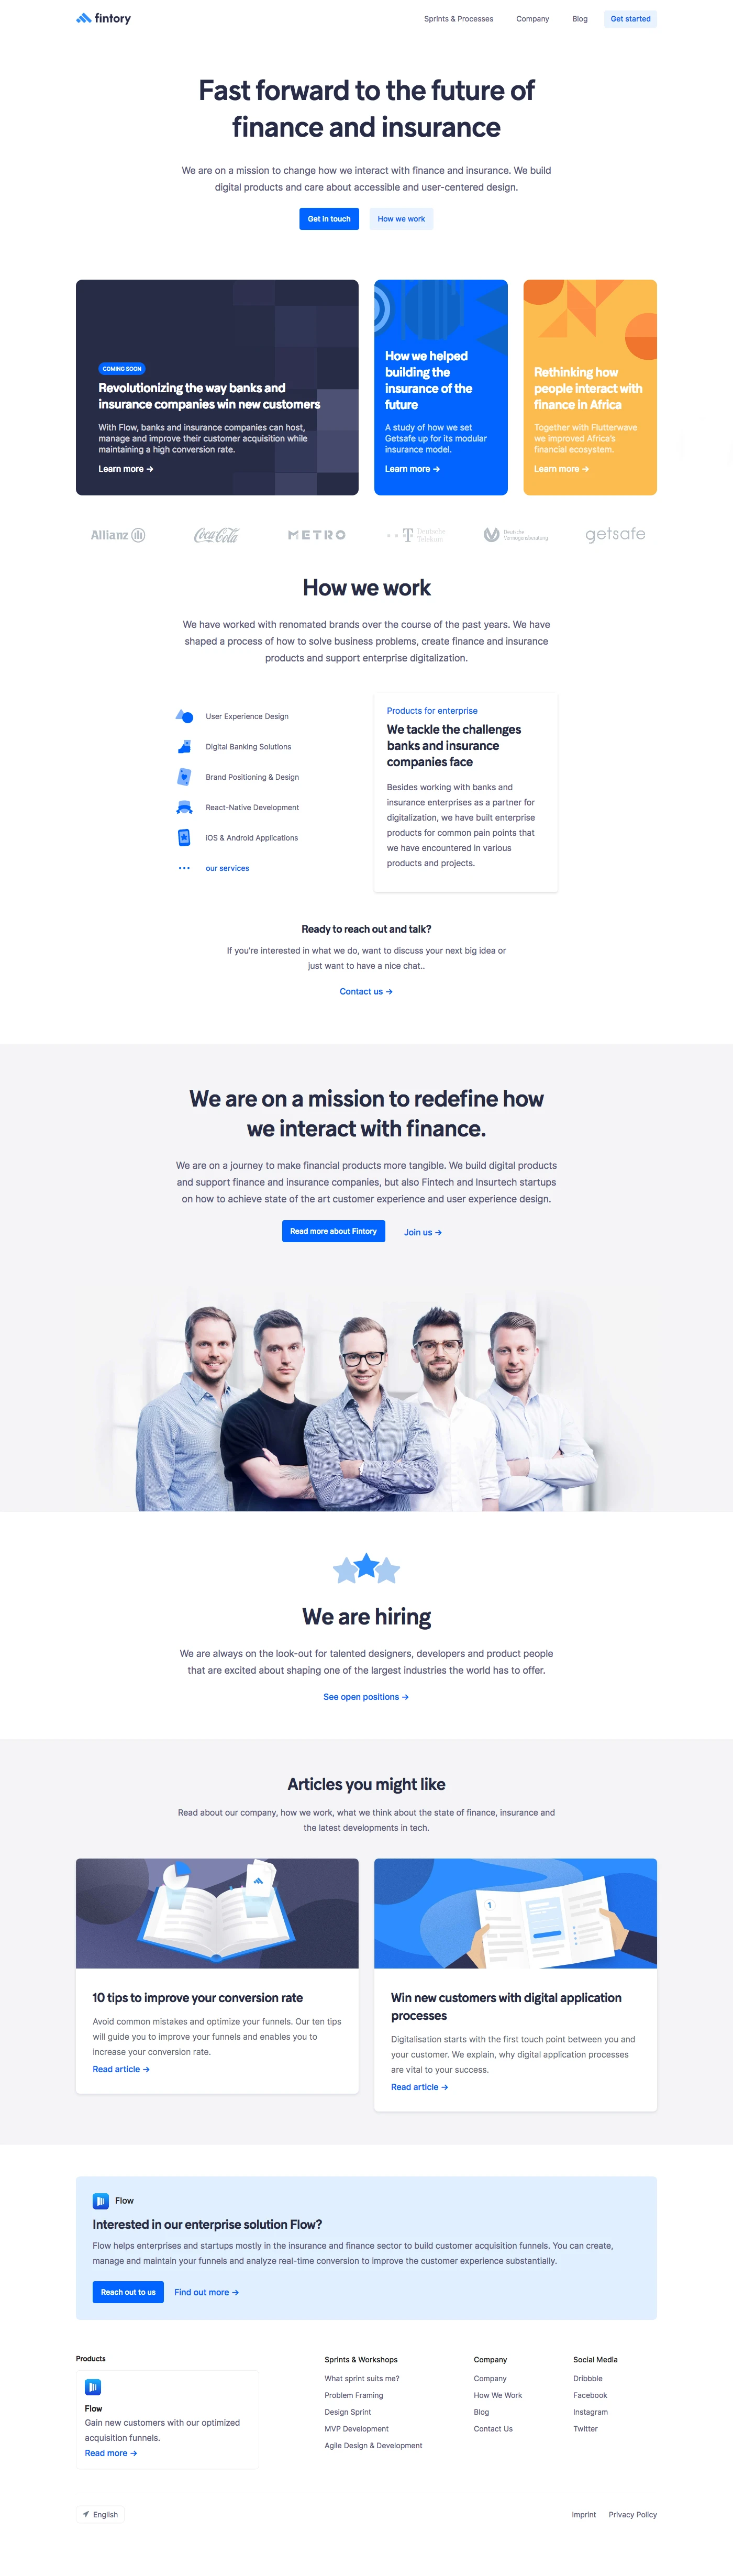 Fintory Landing Page Example: We are on a mission to change how we interact with finance and insurance. We build digital products and care about accessible and user-centered design.